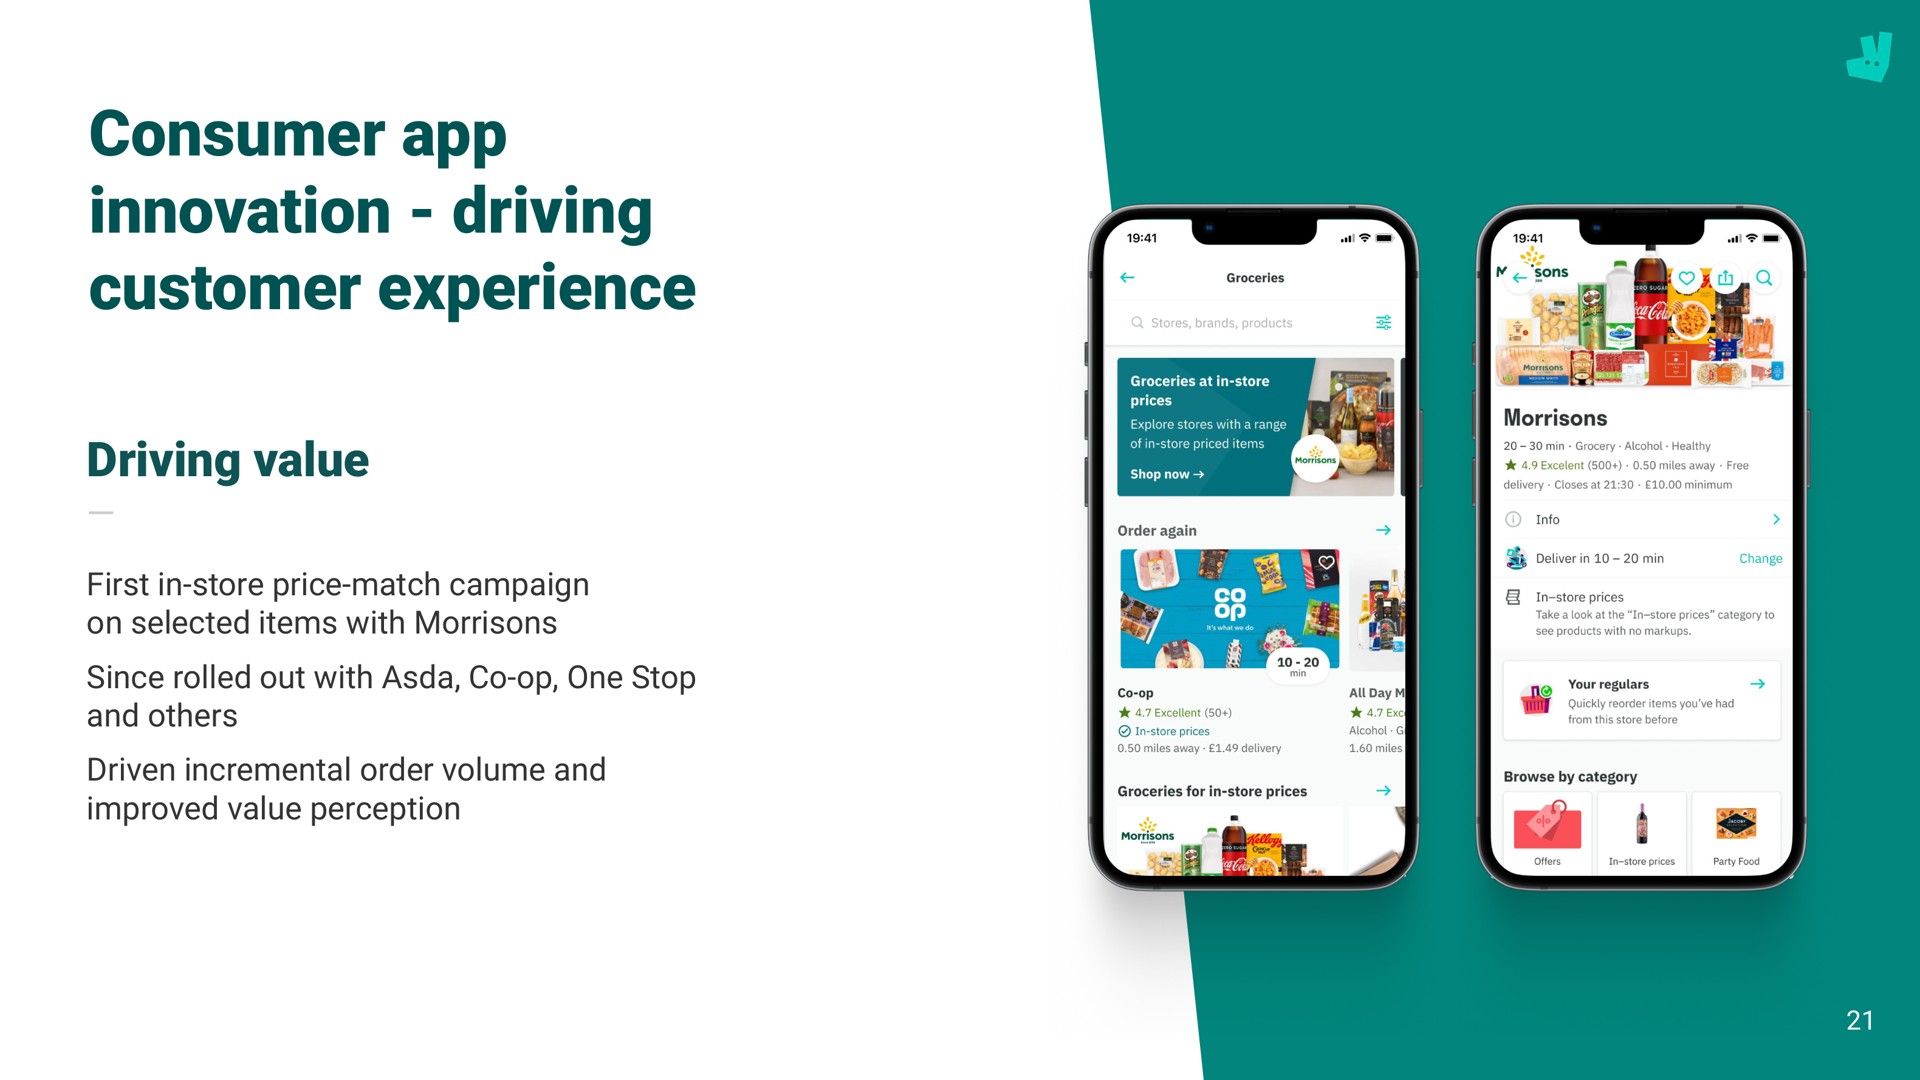 consumer innovation driving customer experience | Deliveroo